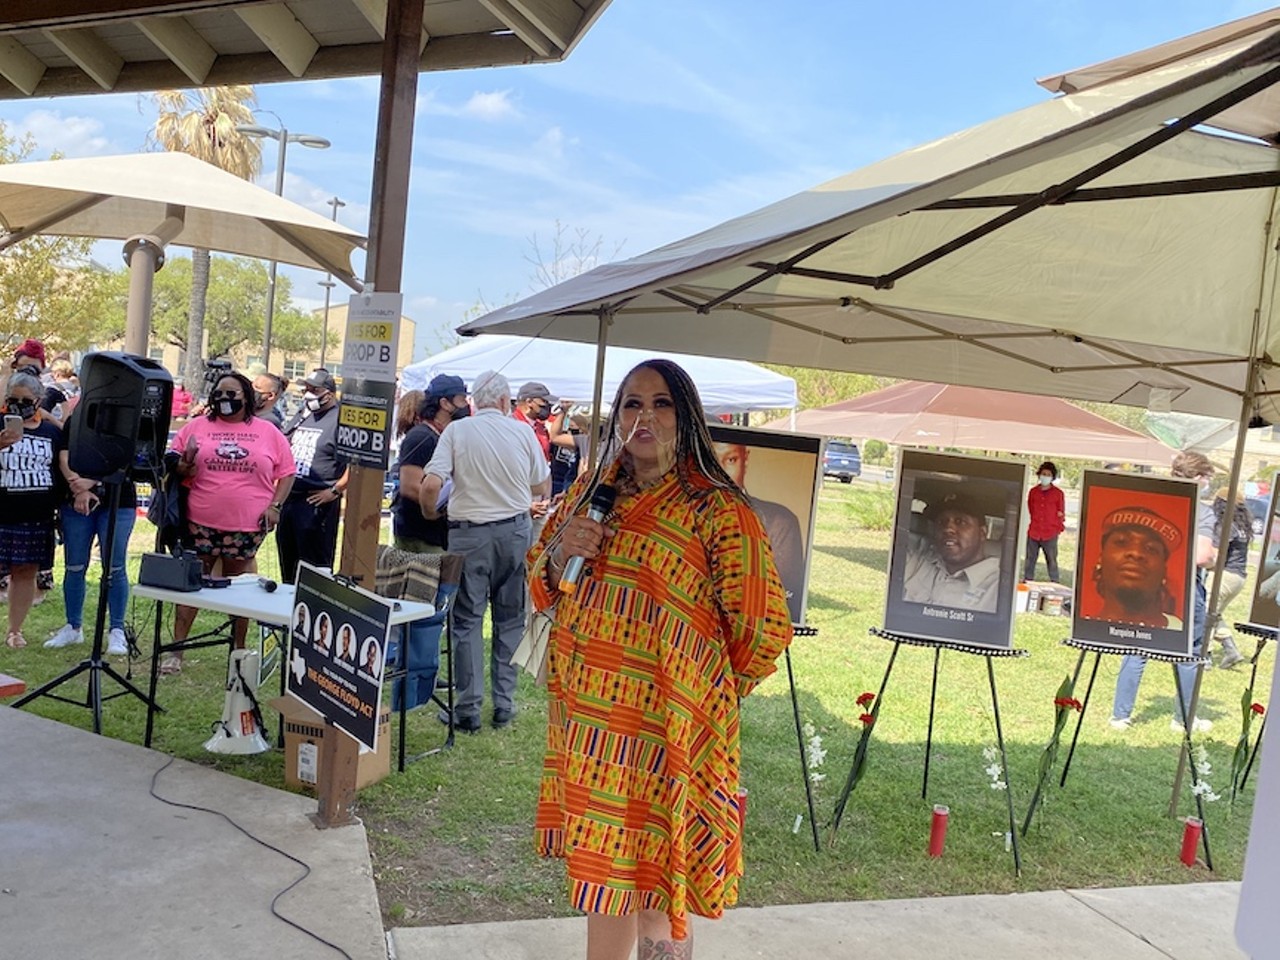 All the people we saw at the San Antonio Coalition for Police Accountability's Prop B rally